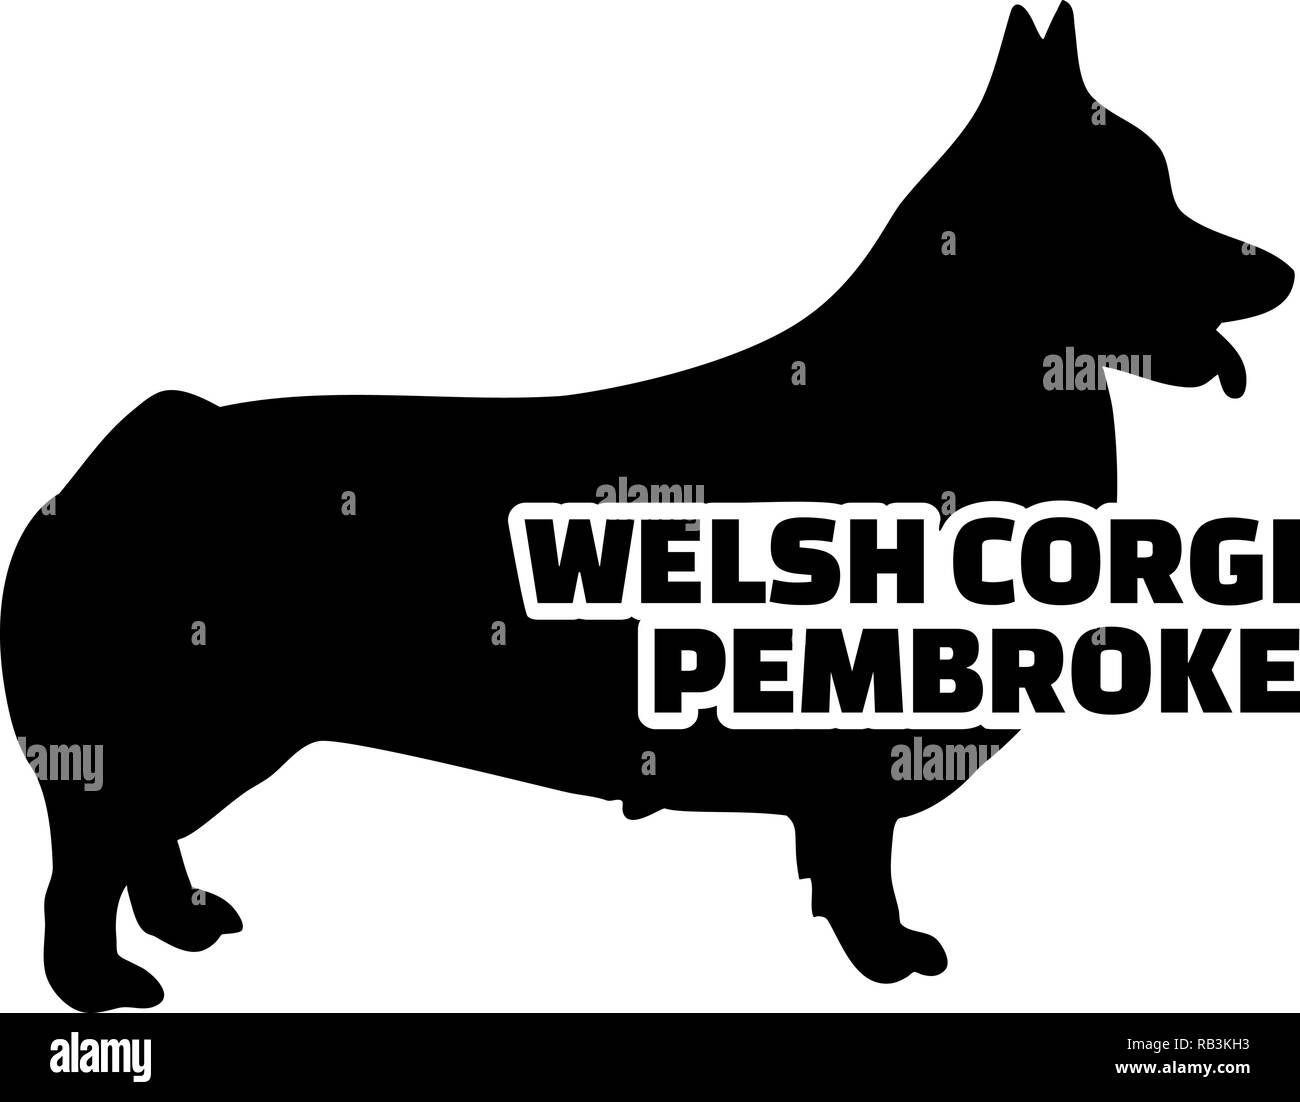 Welsh Corgi Pembroke silhouette real with word Stock Vector